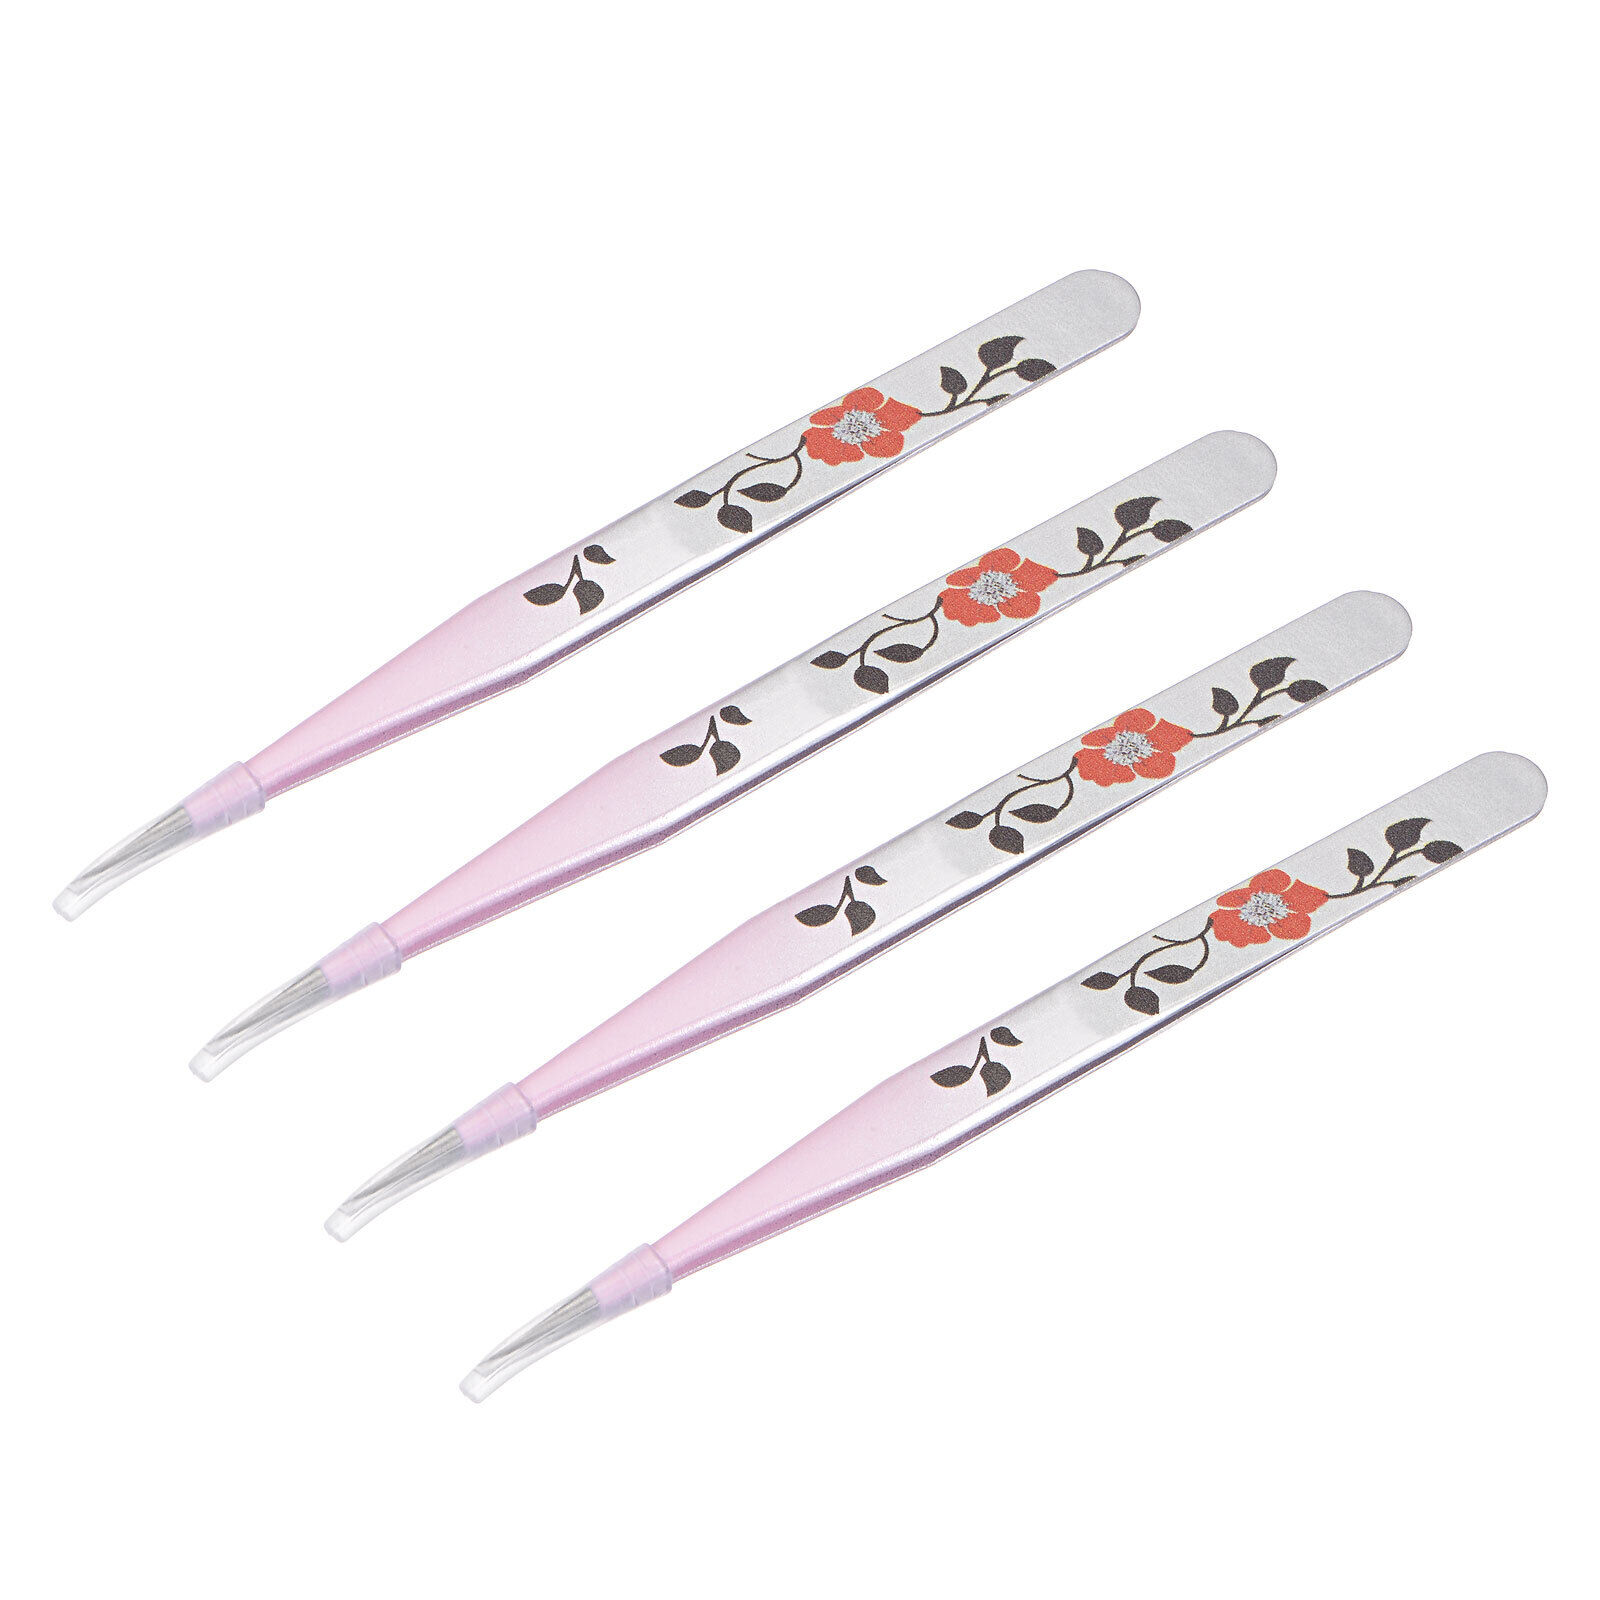 Precision Straight Tip Tweezer Pink Silver Tone with Flower Print 4Pcs